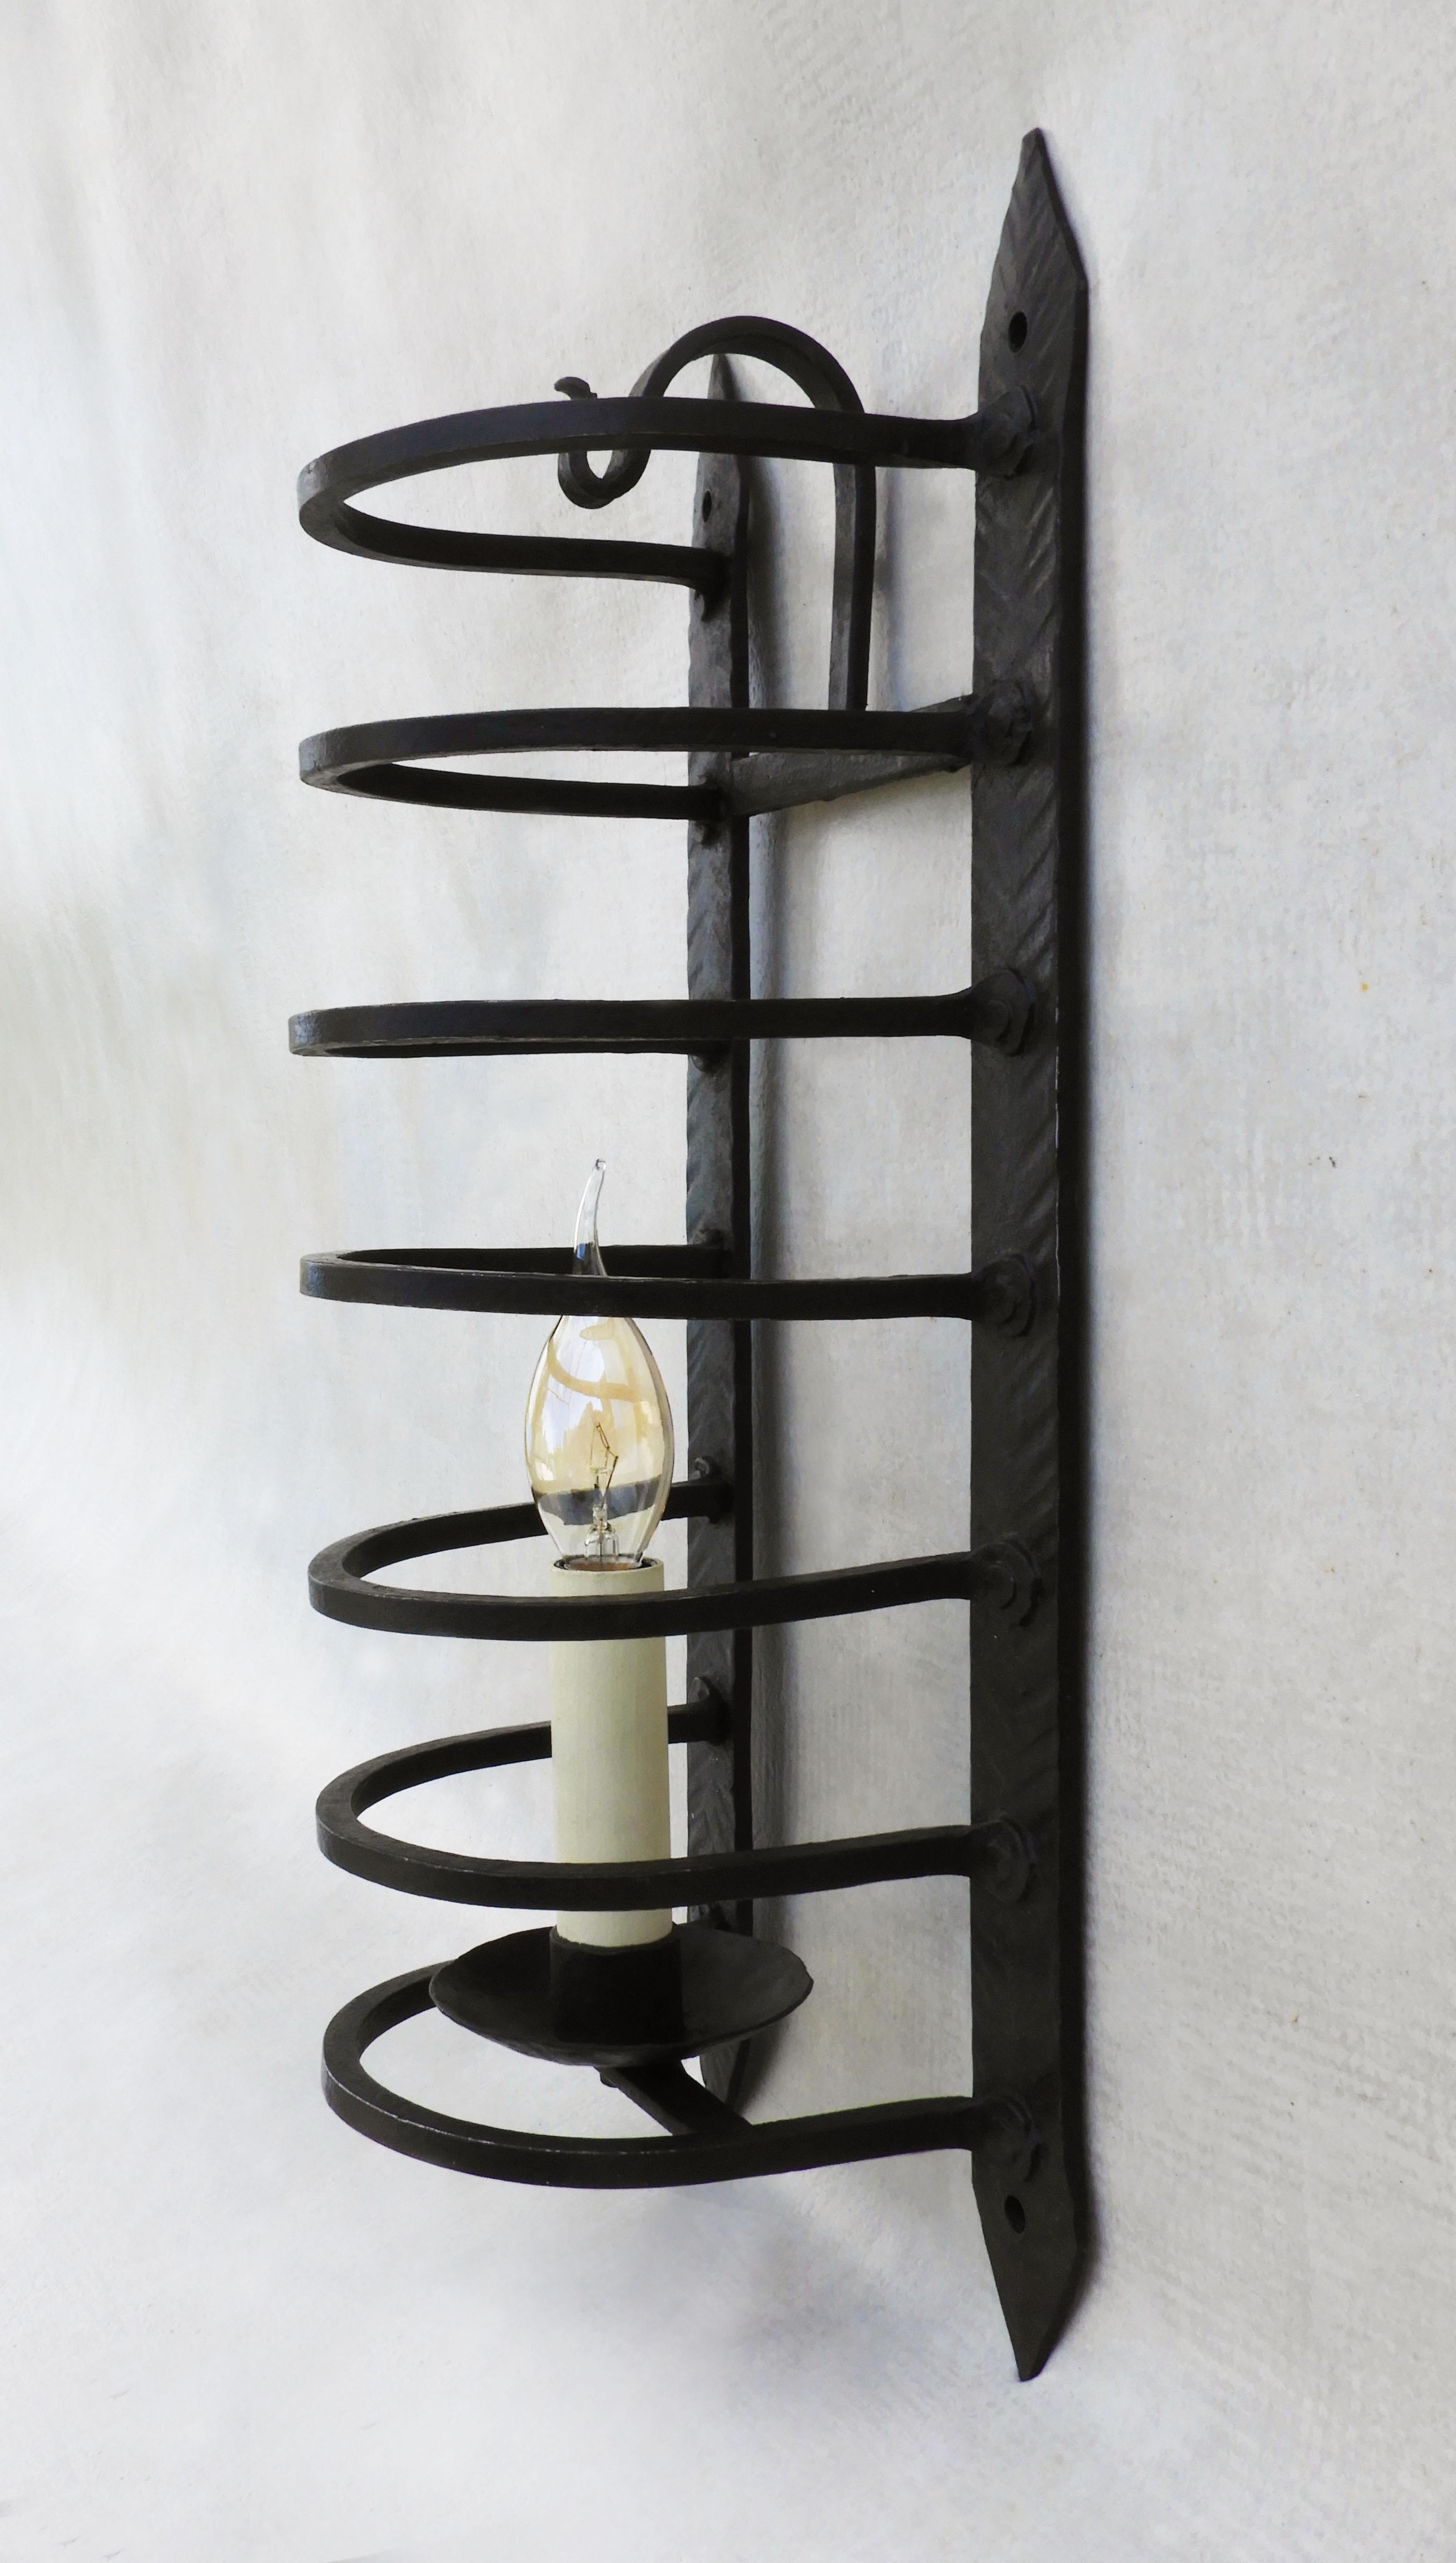 Forged French Wrought Iron Caged Wall Light Sconce, circa 1900 For Sale